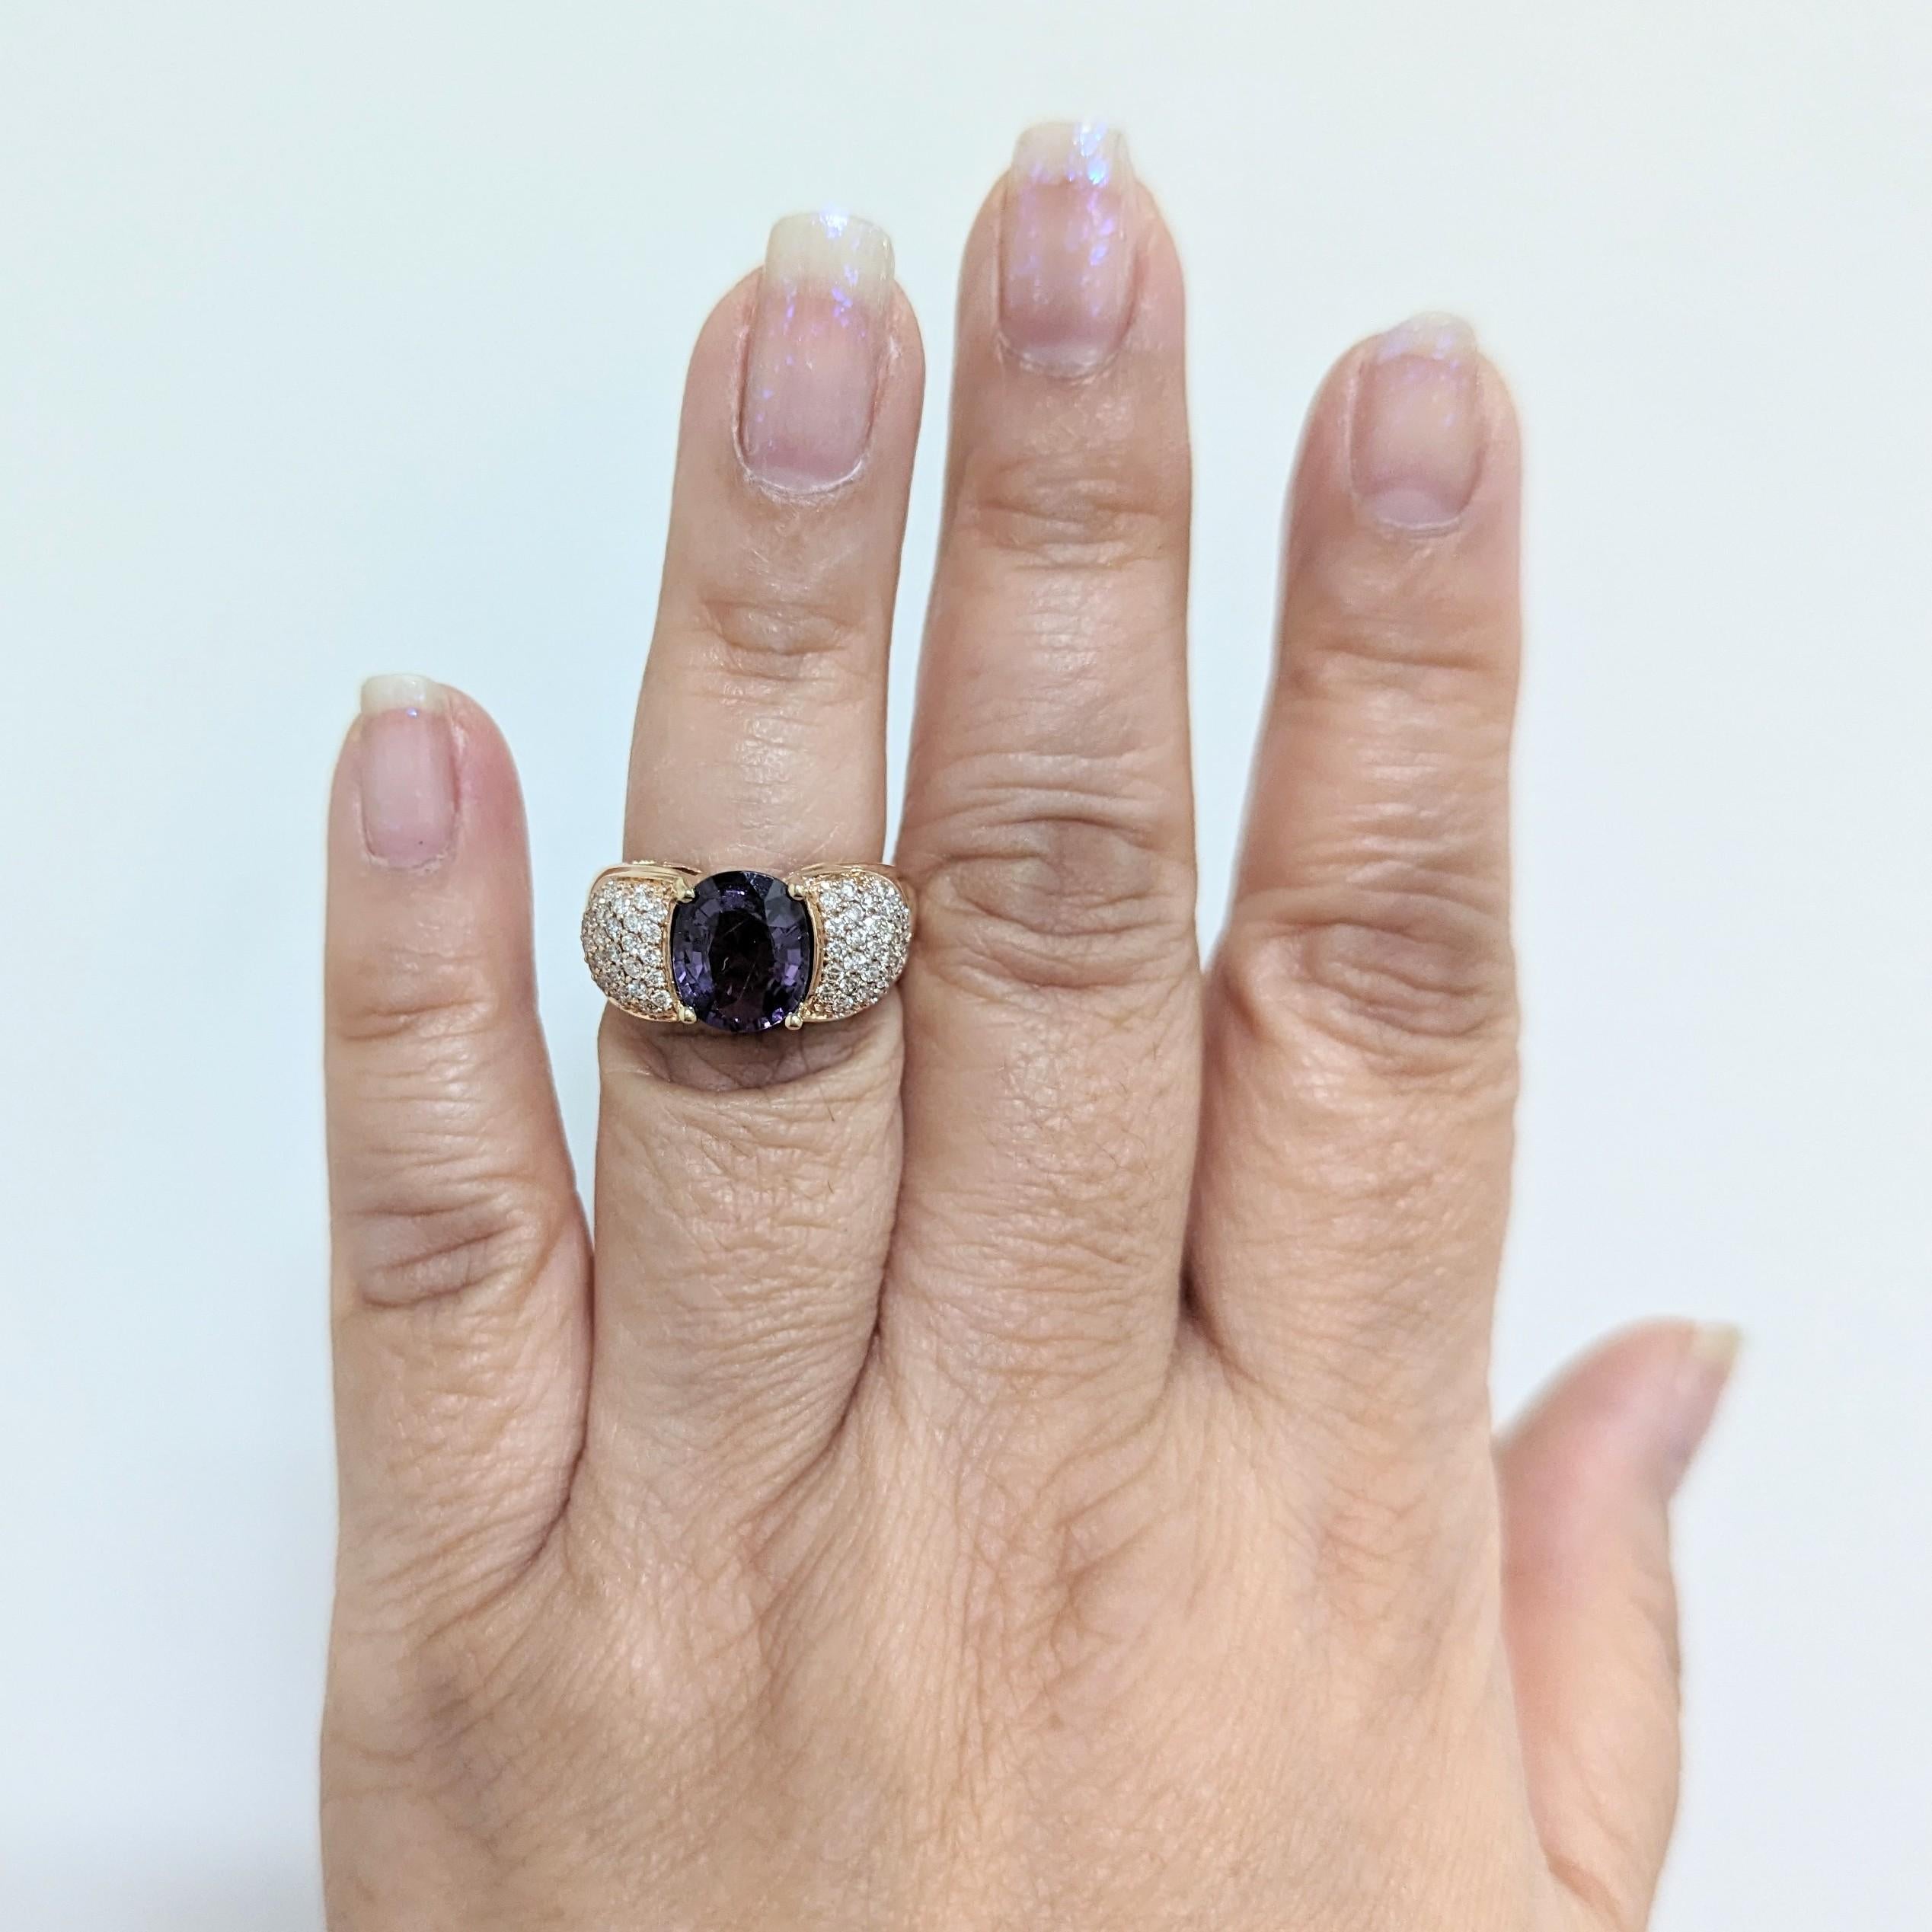 Beautiful 2.44 ct. purple spinel oval with 0.30 ct. good quality white diamond rounds.  Handmade in 18k rose gold.  Ring size 6.5.